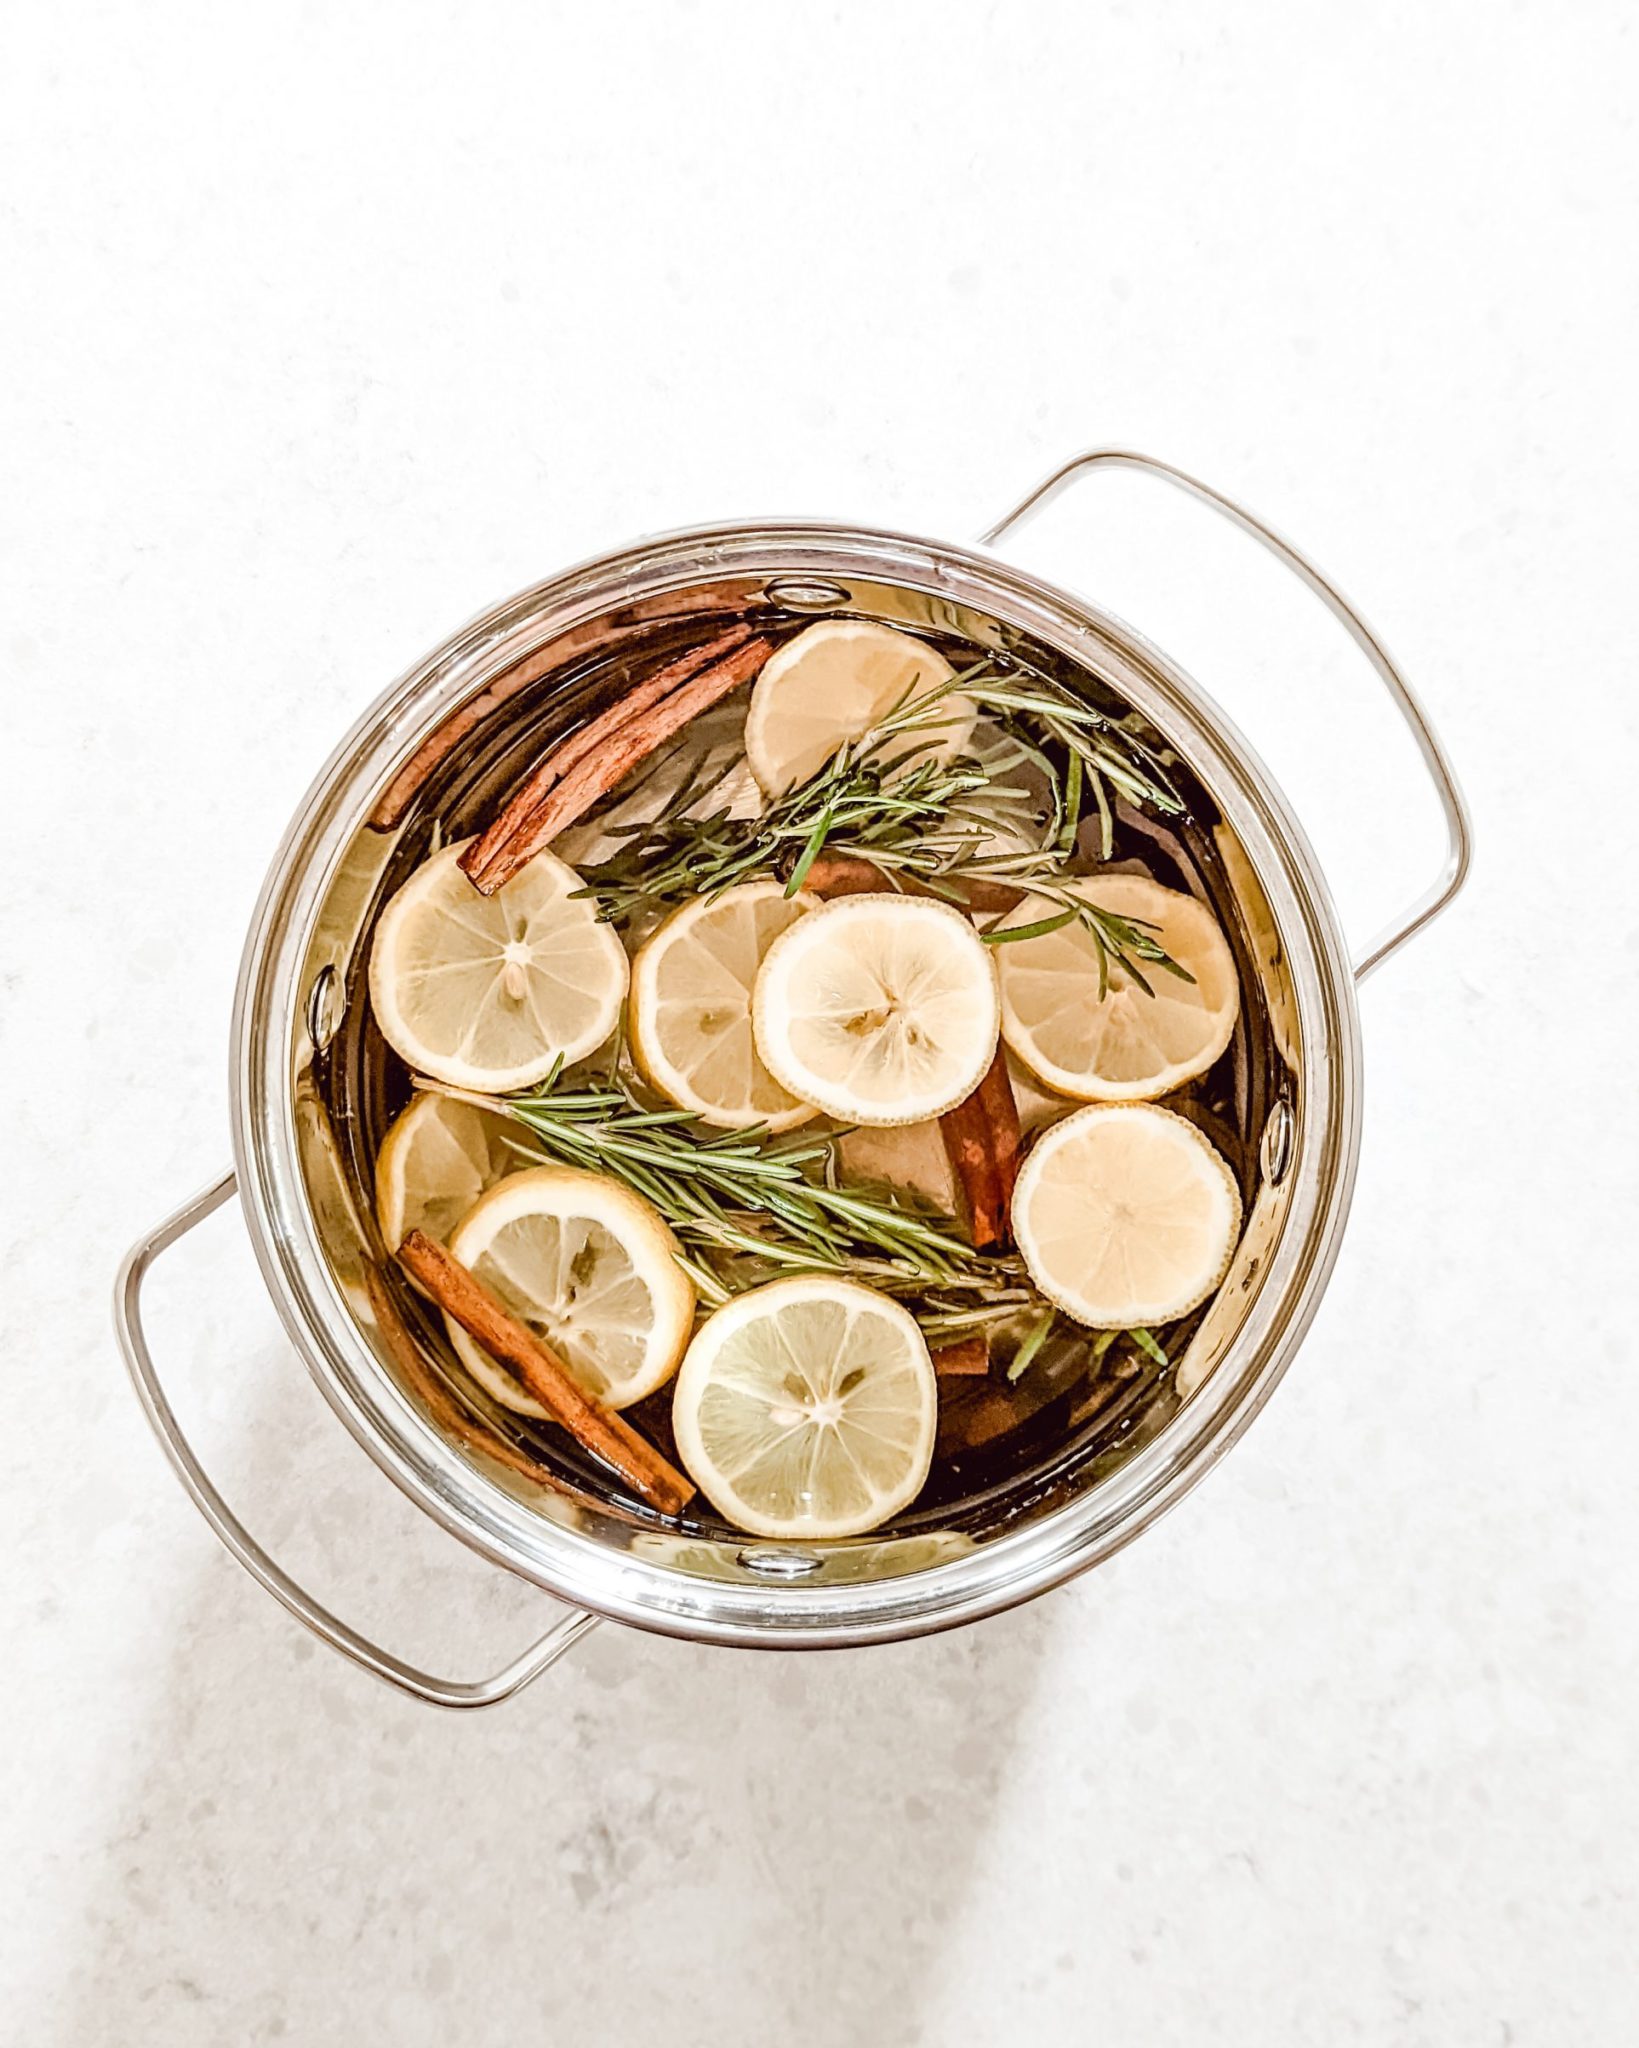 The Best Smelling Spring Simmer Pot Recipes to Freshen Up Your Home